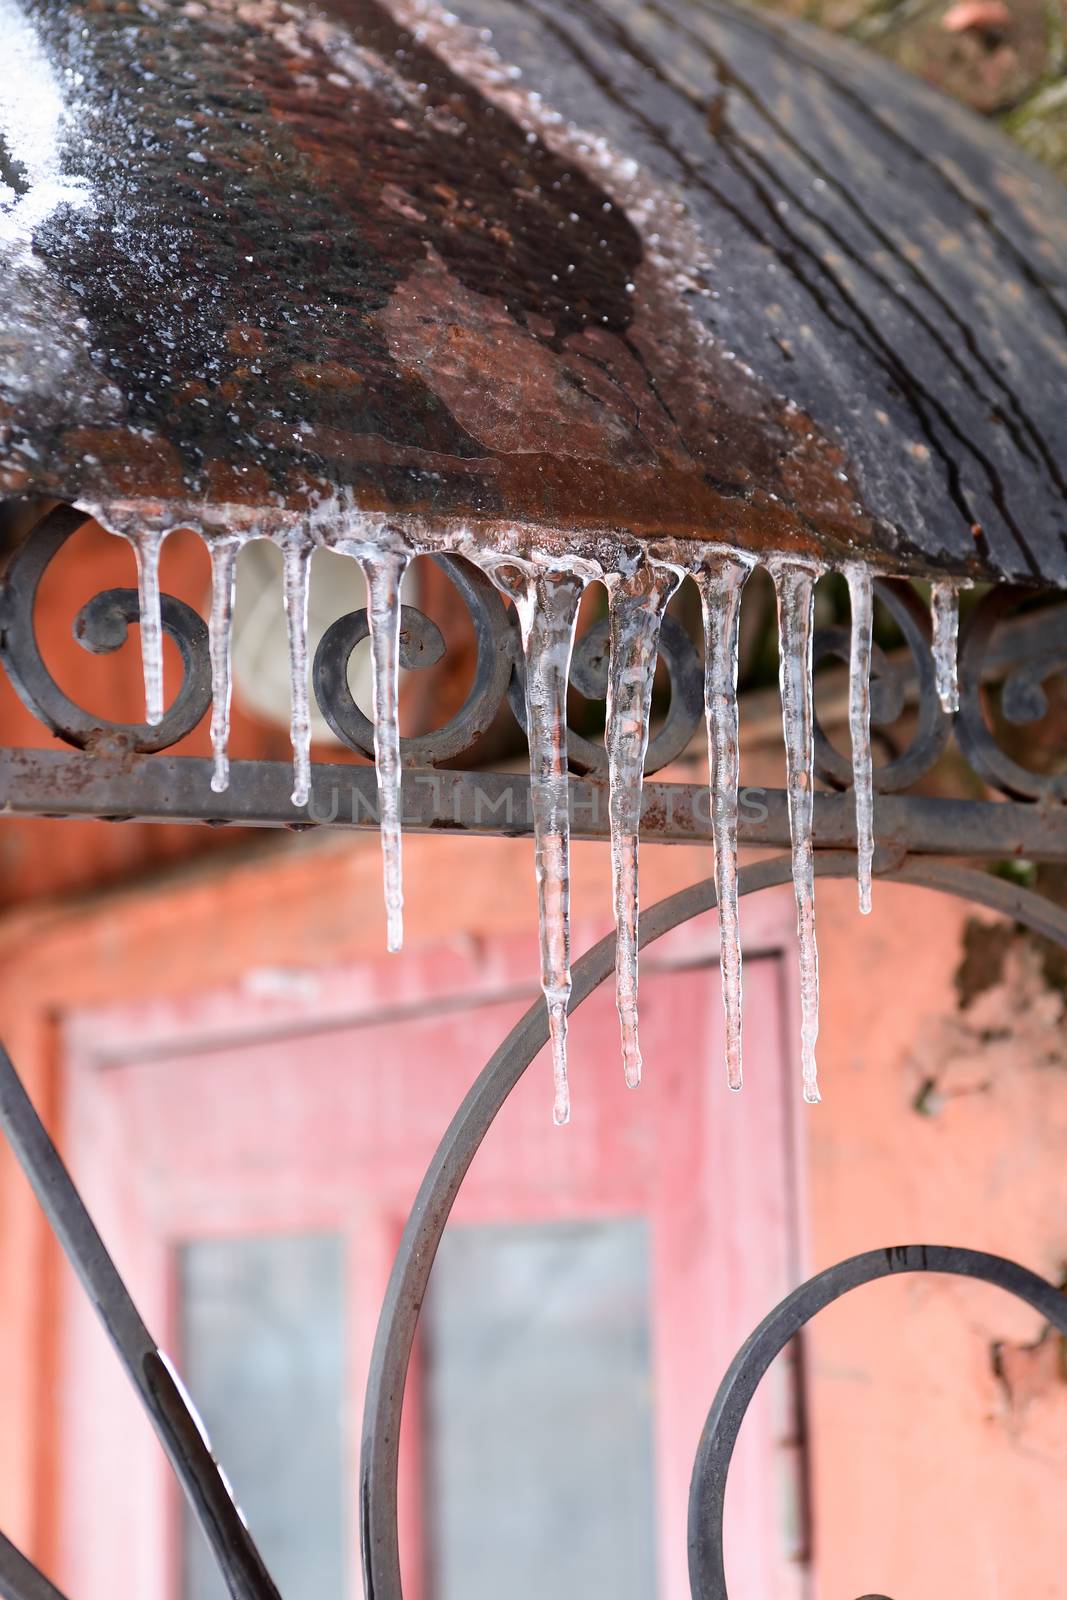 Spring beginning. Few icicles in a row on old metal roof